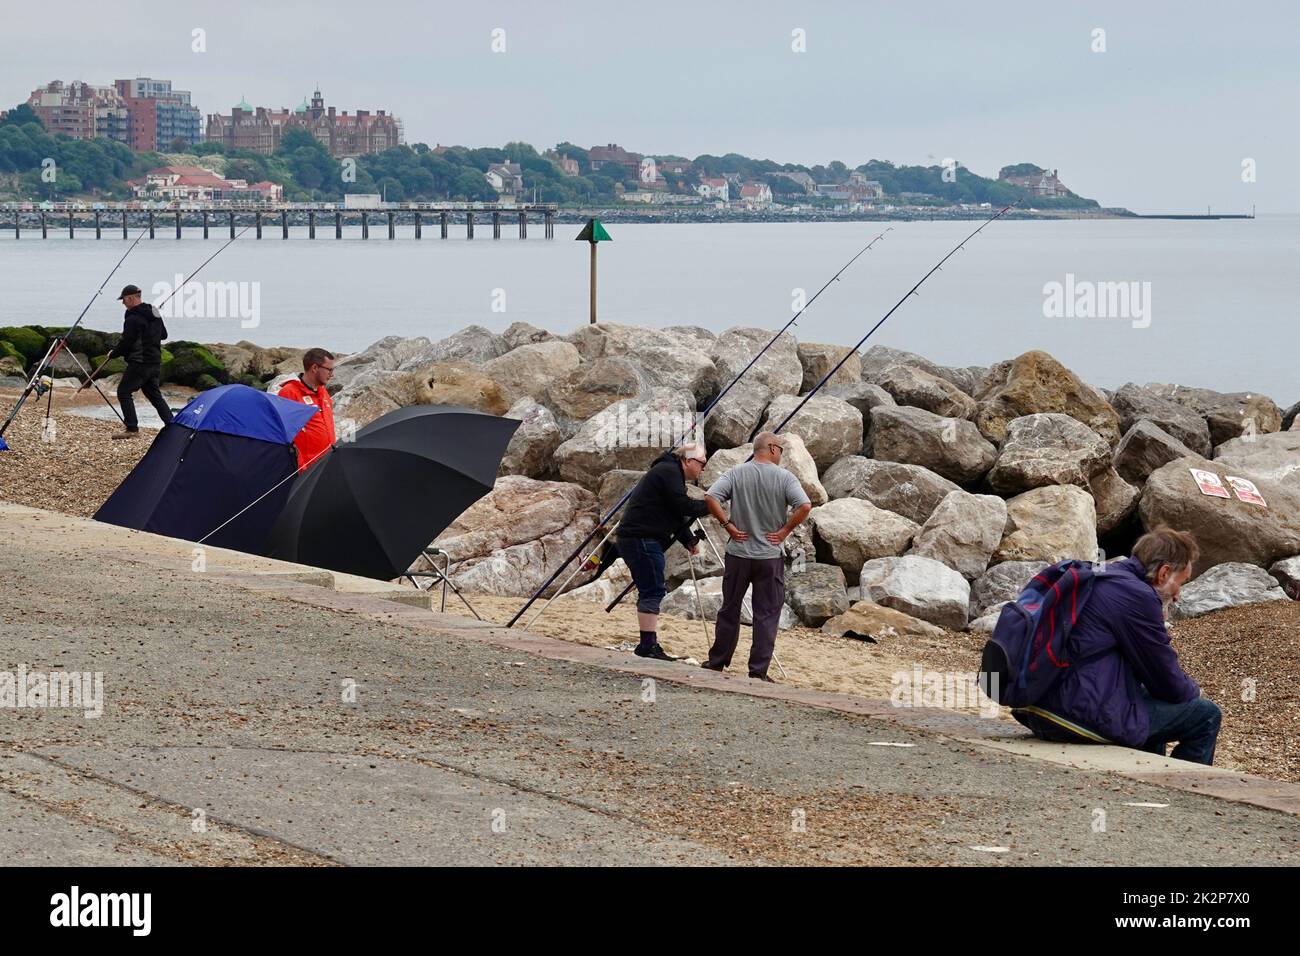 Felixstowe, Suffolk, UK - 23 September 2022 : Fishermen and their tents on the beach. Stock Photo